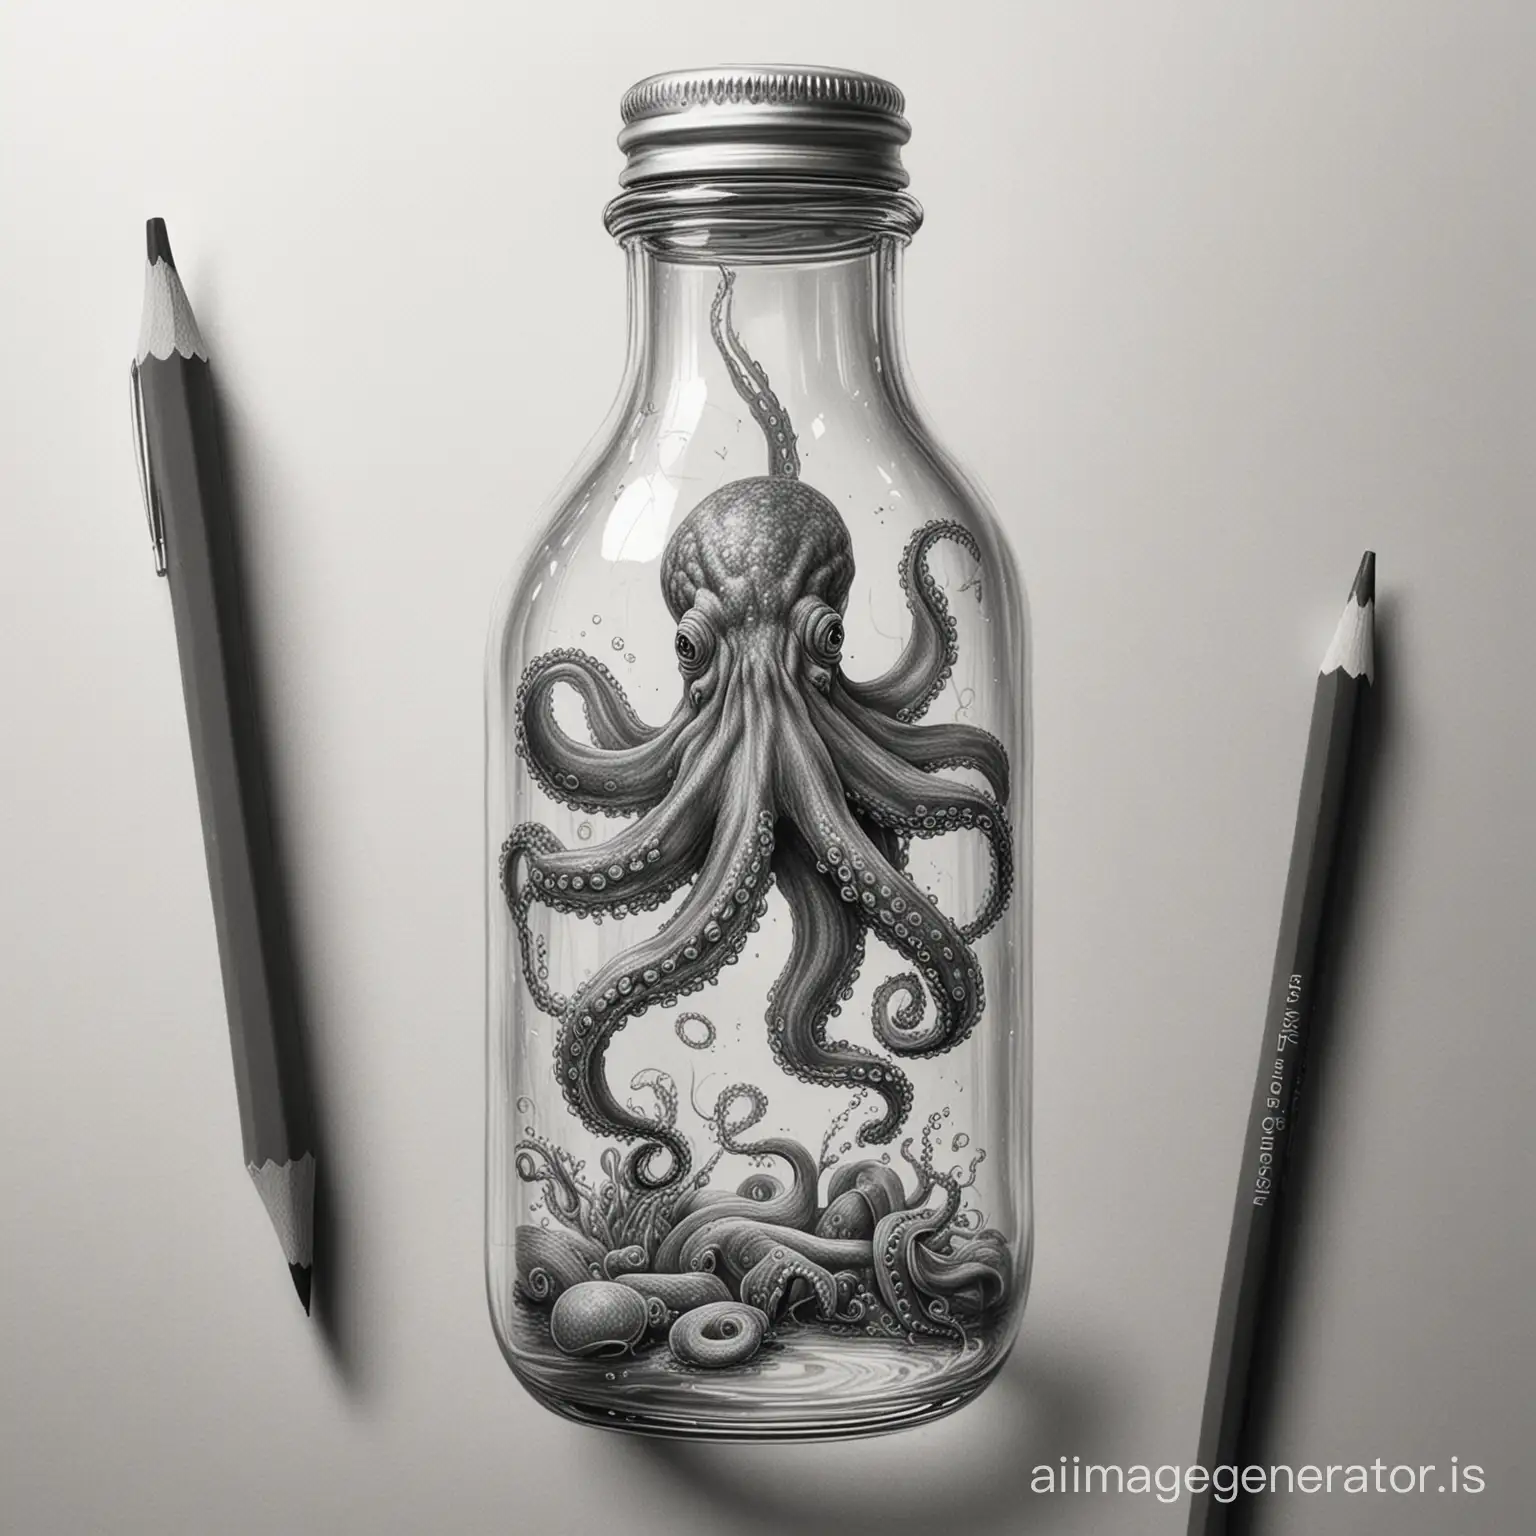 Pencil sketch of an octopus stuck inside a clear bottle, ultra-realistic drawing style